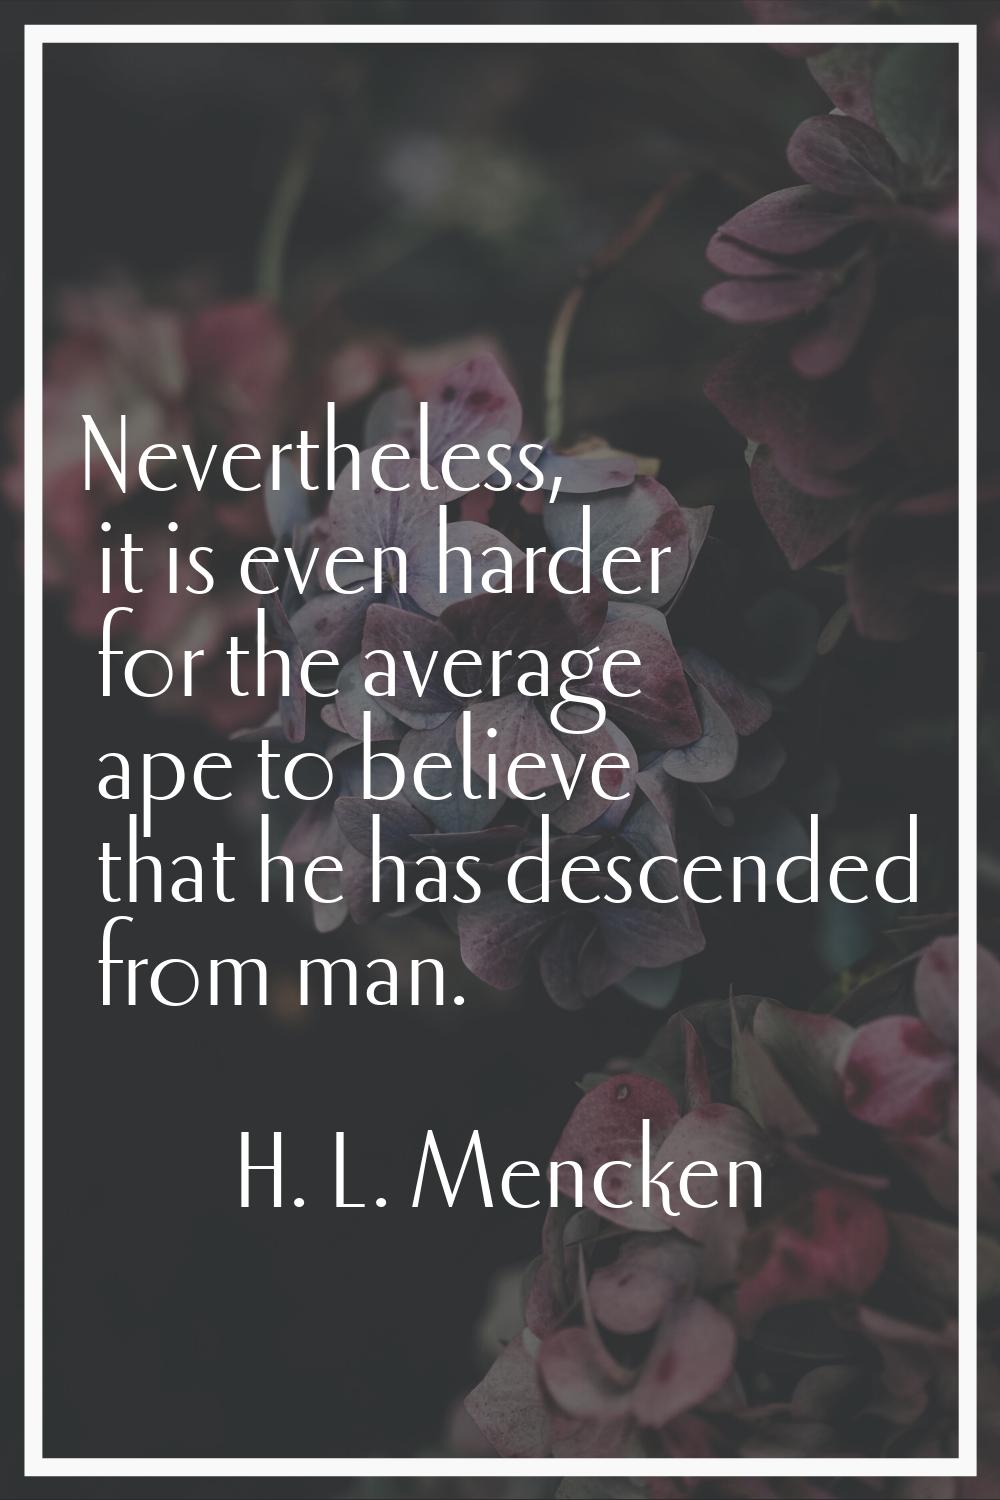 Nevertheless, it is even harder for the average ape to believe that he has descended from man.